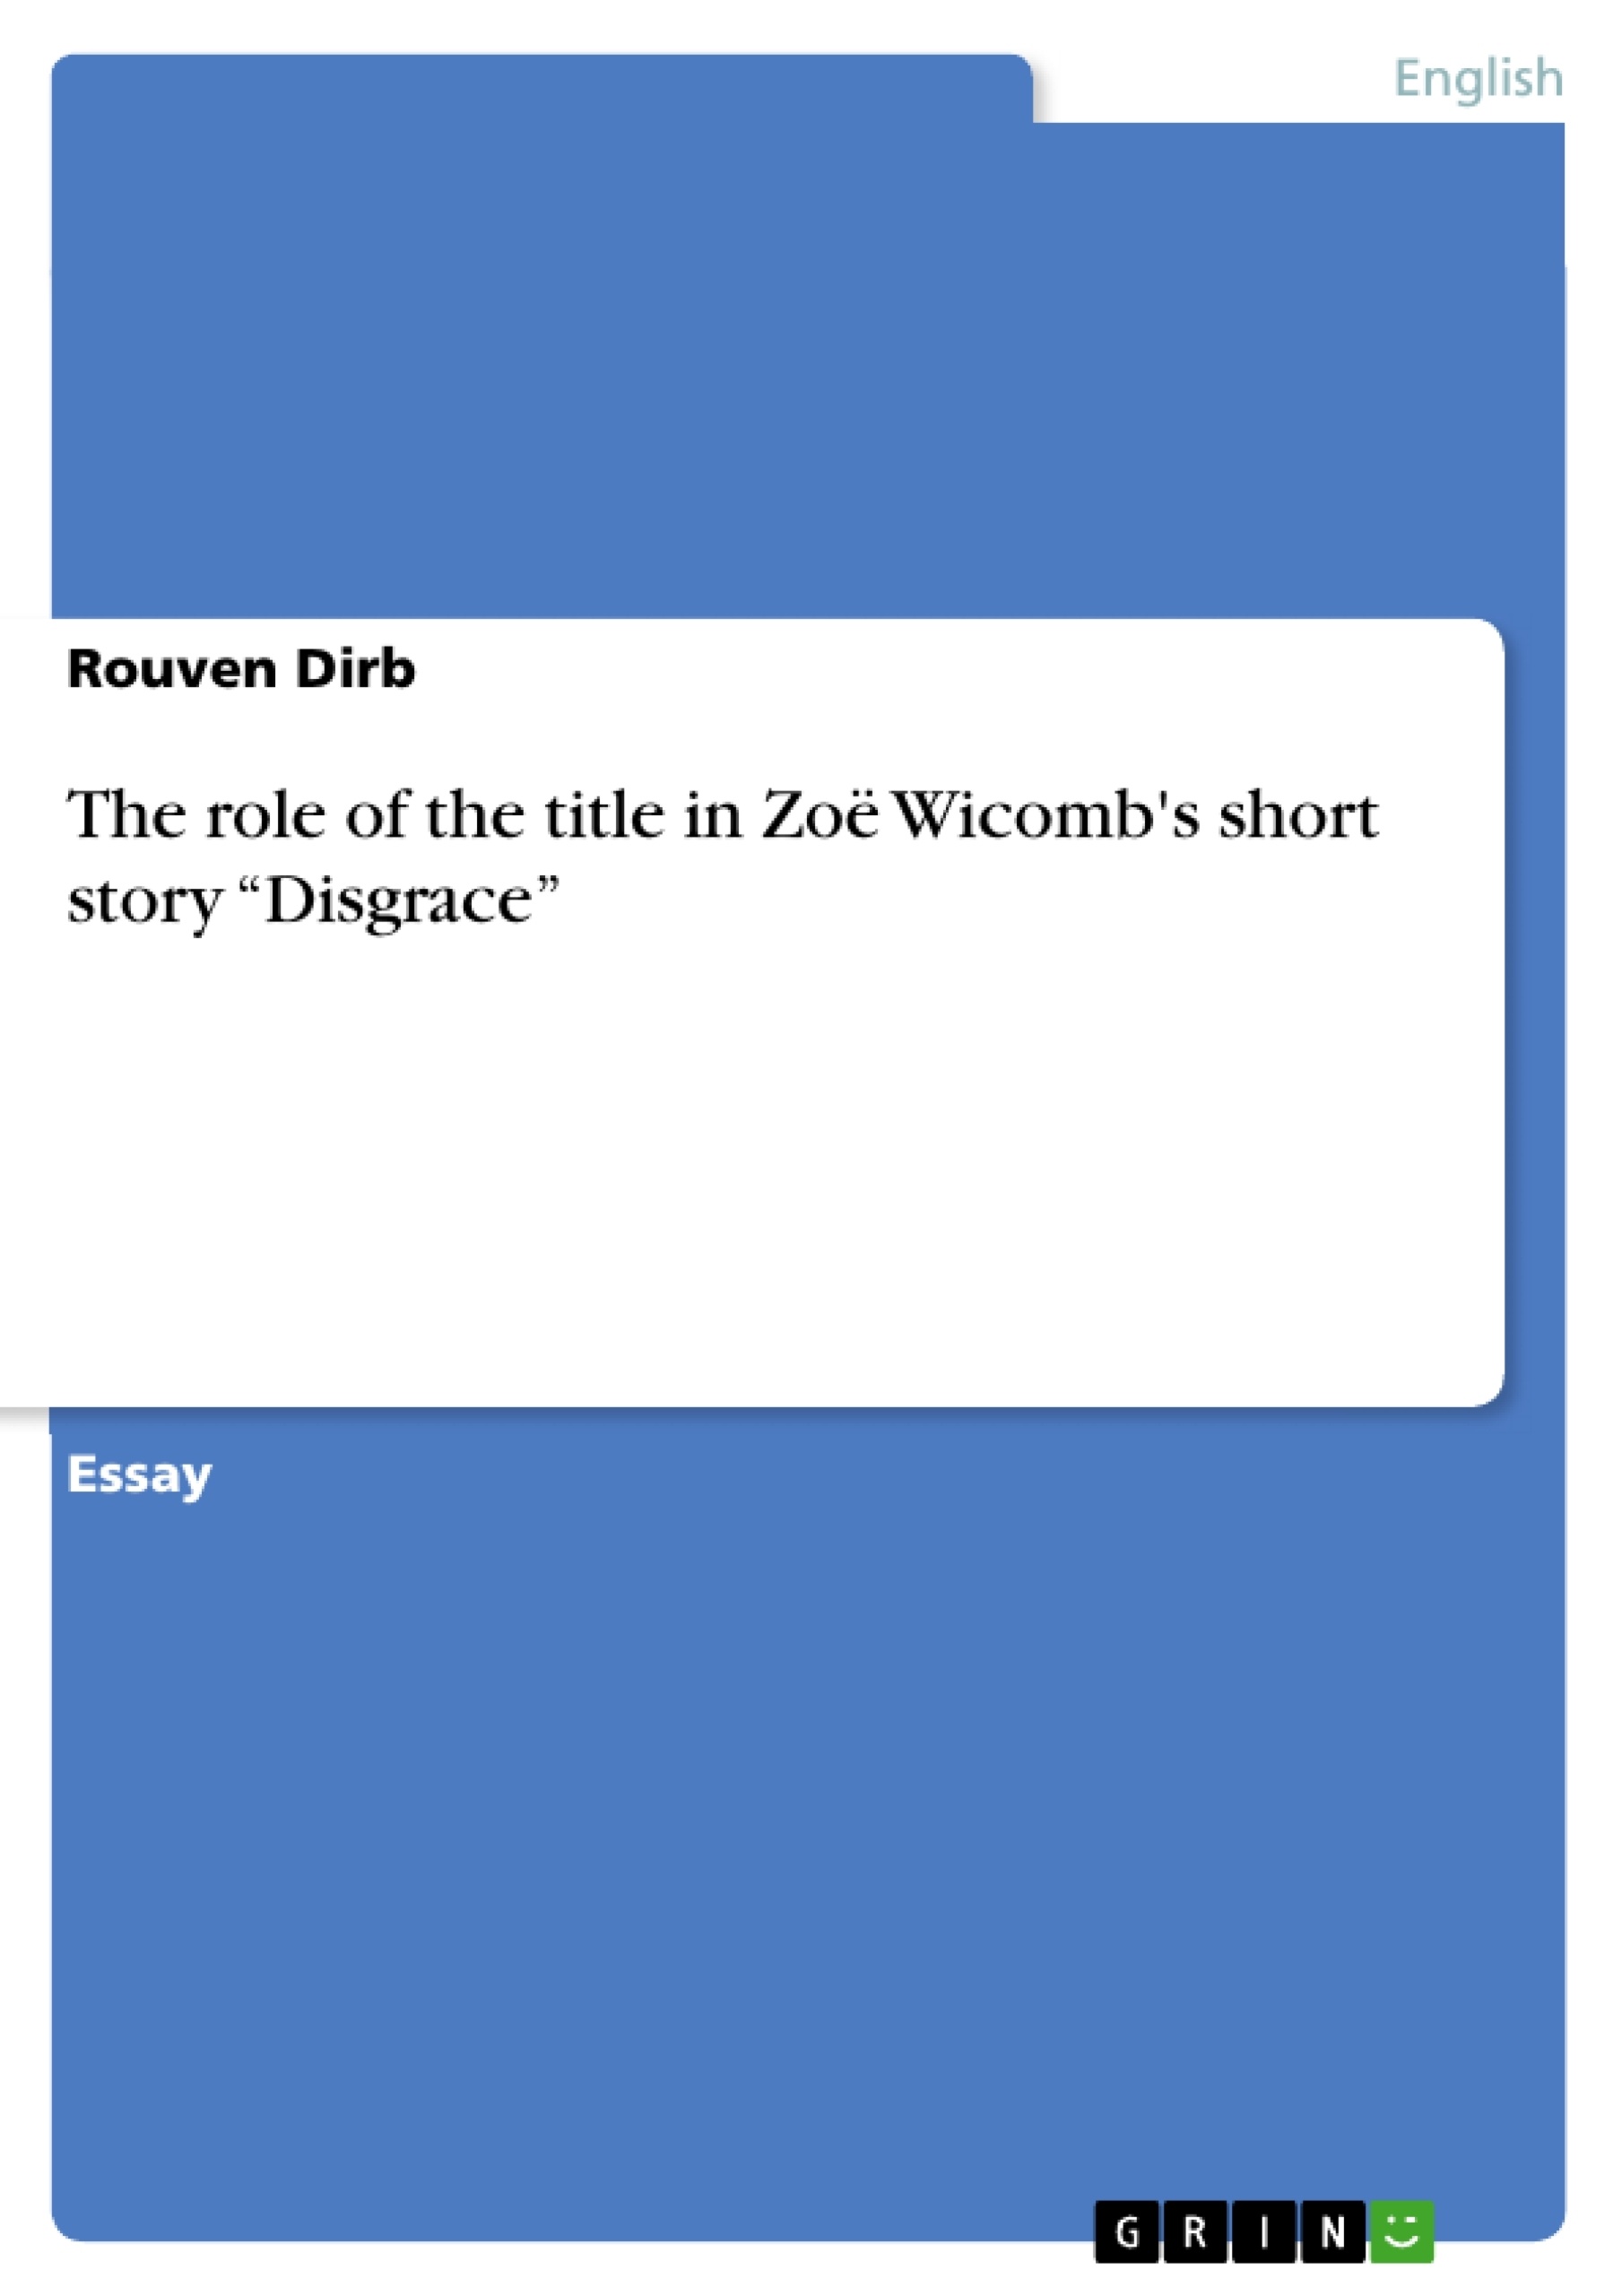 Title: The role of the title in Zoë Wicomb's short story “Disgrace”